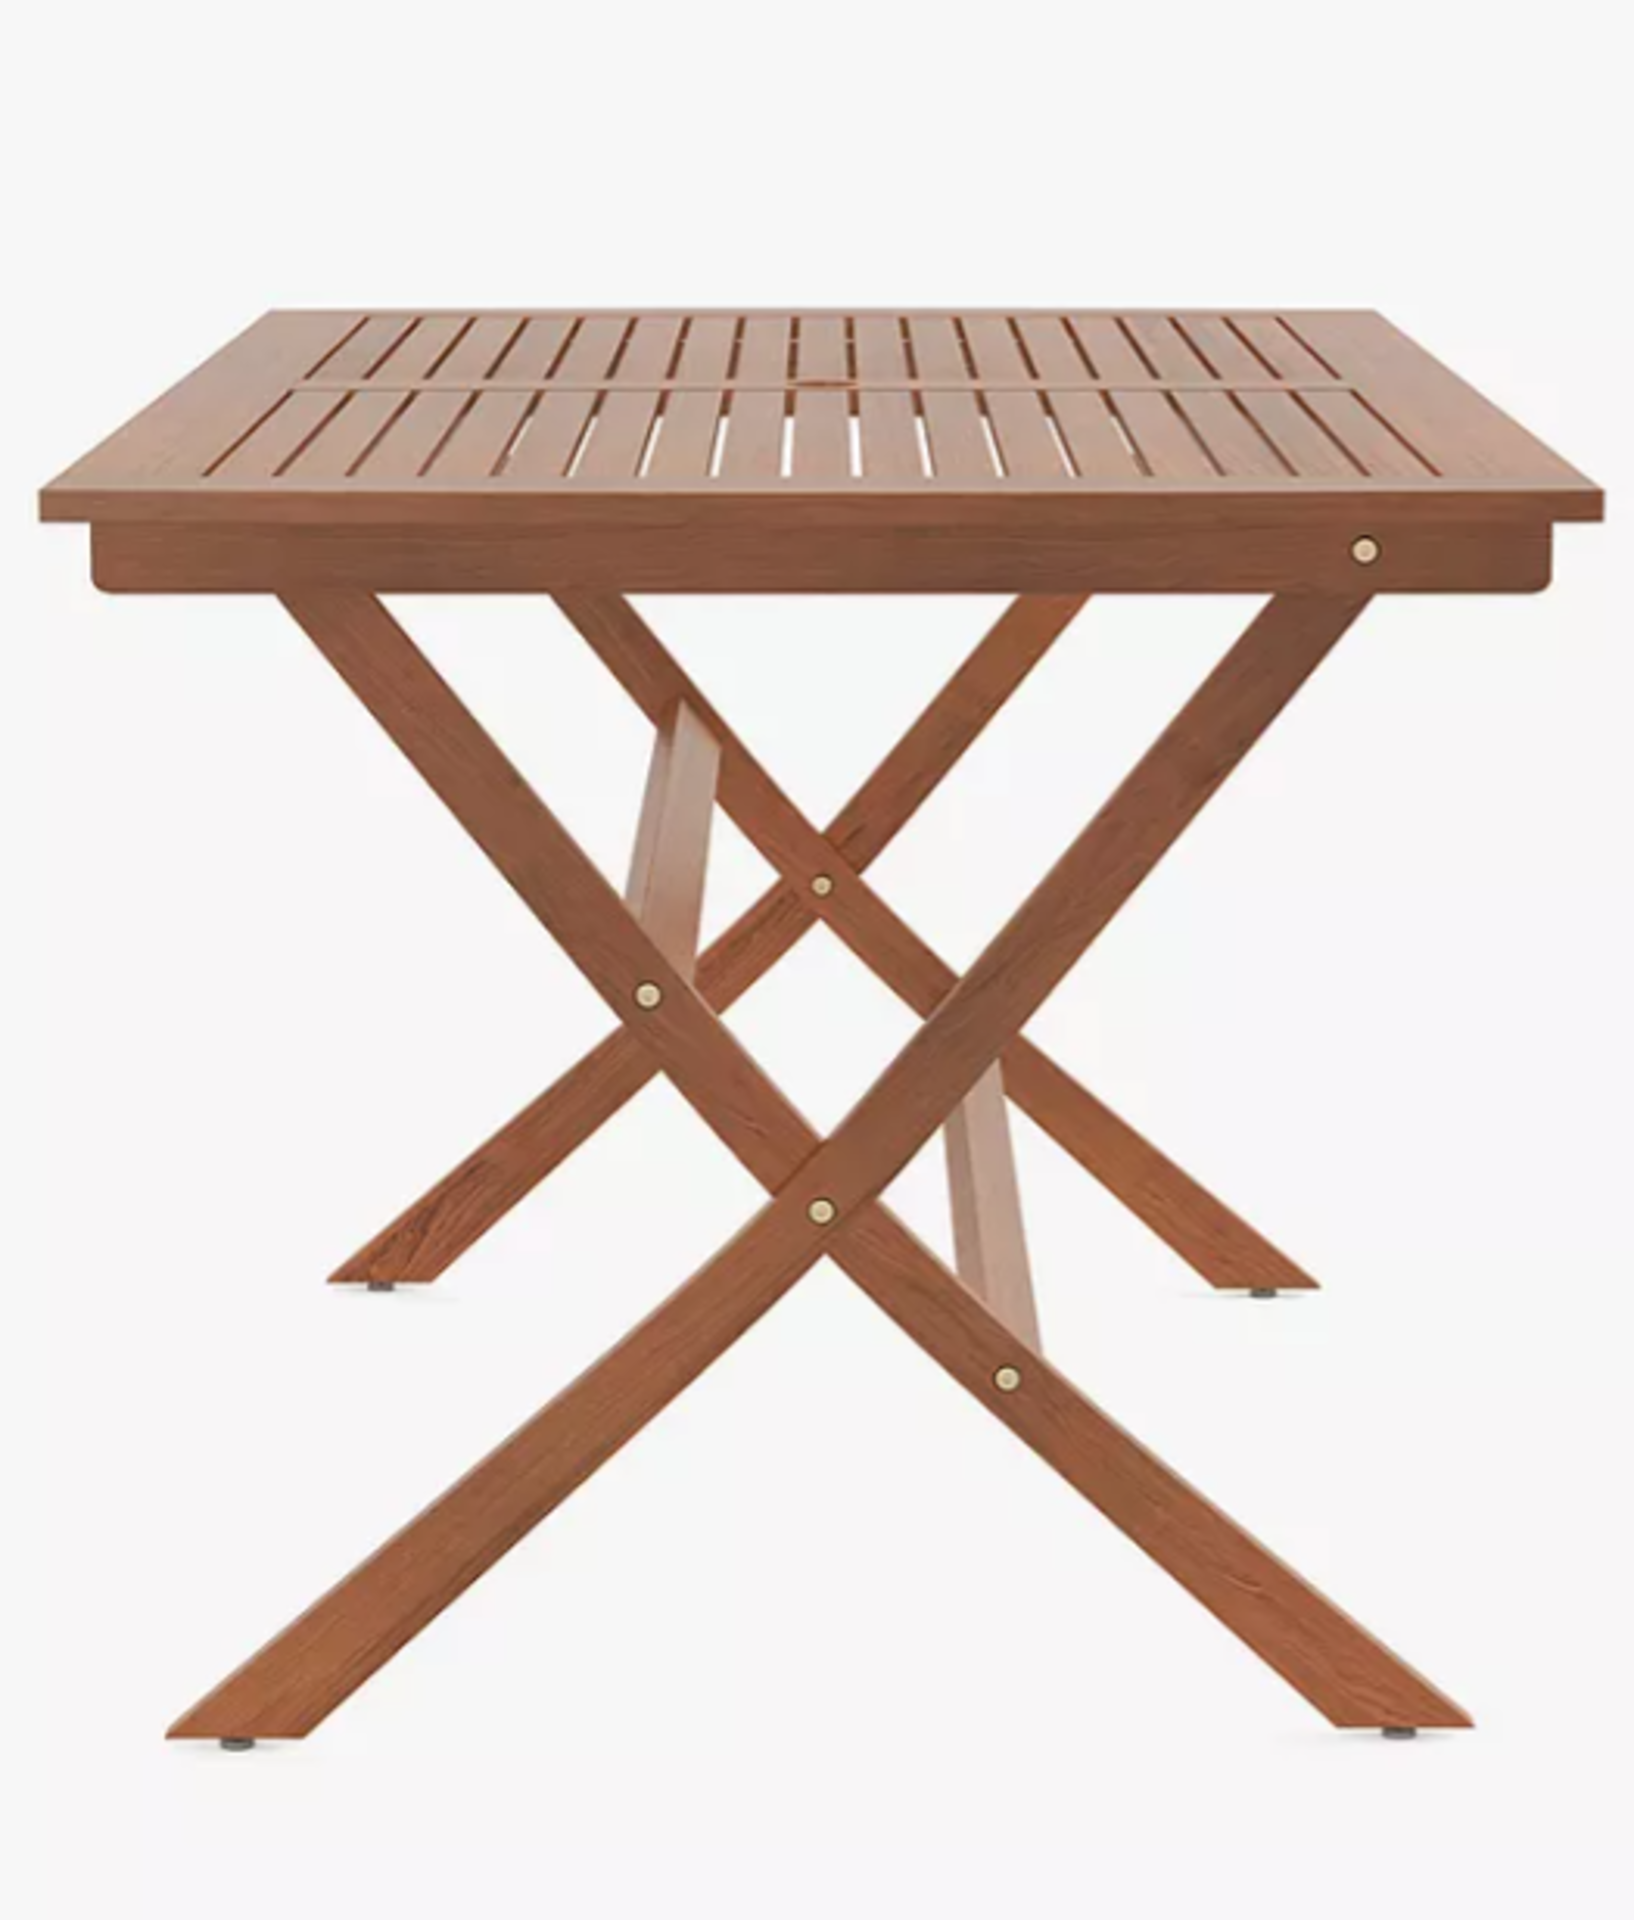 BRAND NEW JOHN LEWIS 6-Seater Folding Garden Dining Table, FSC-Certified (Eucalyptus Wood), Natural. - Image 2 of 3